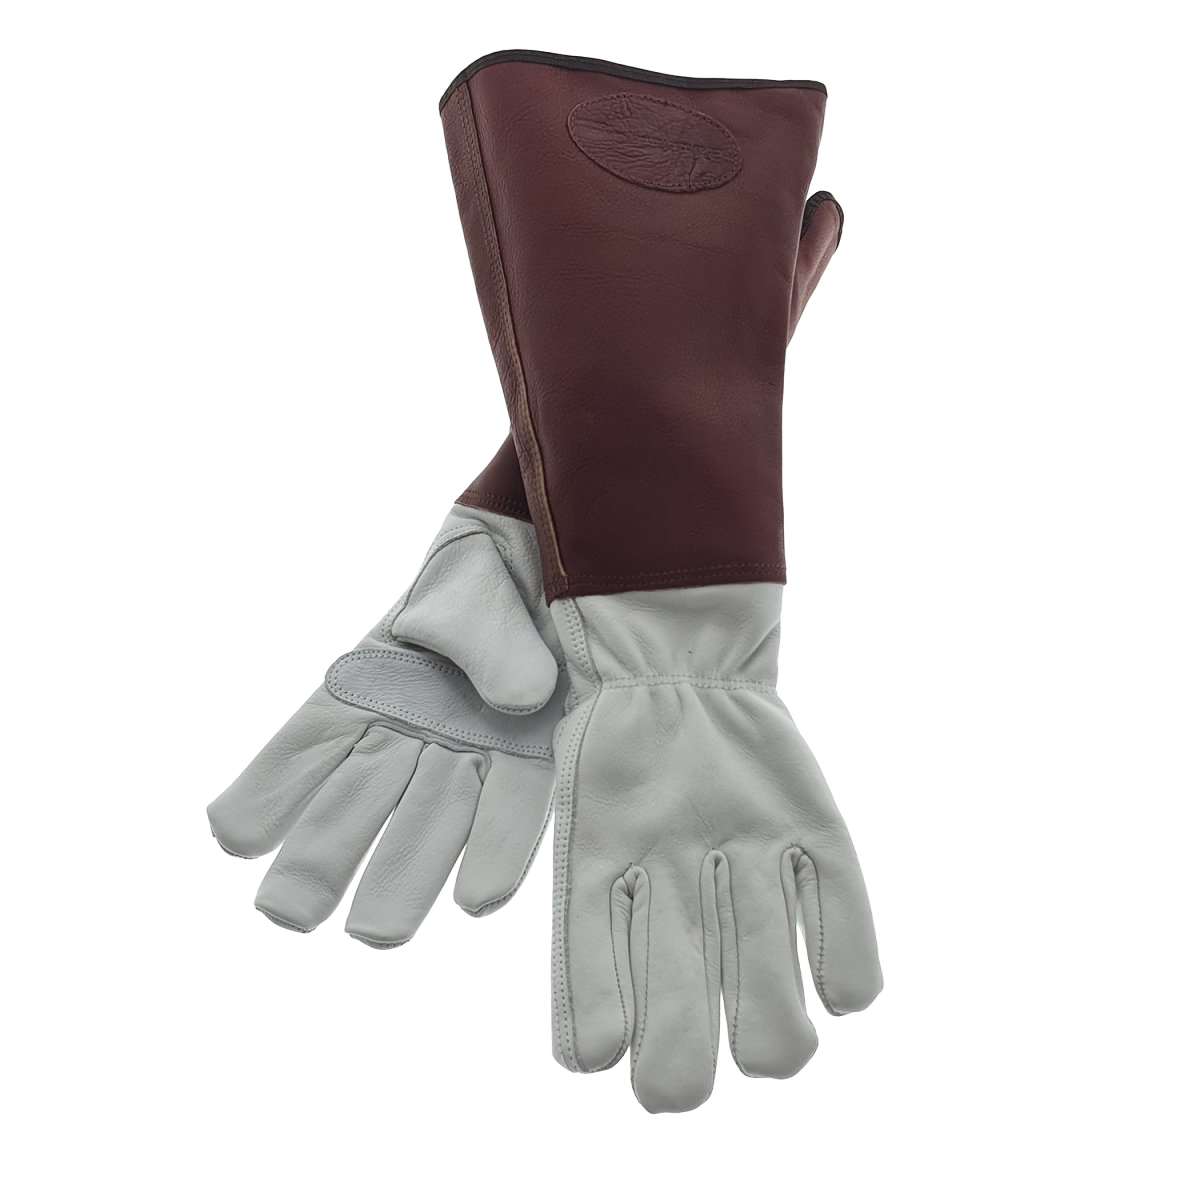 Heritage British Garden Company - gardening gloves - all leather - thorn proof - size men L